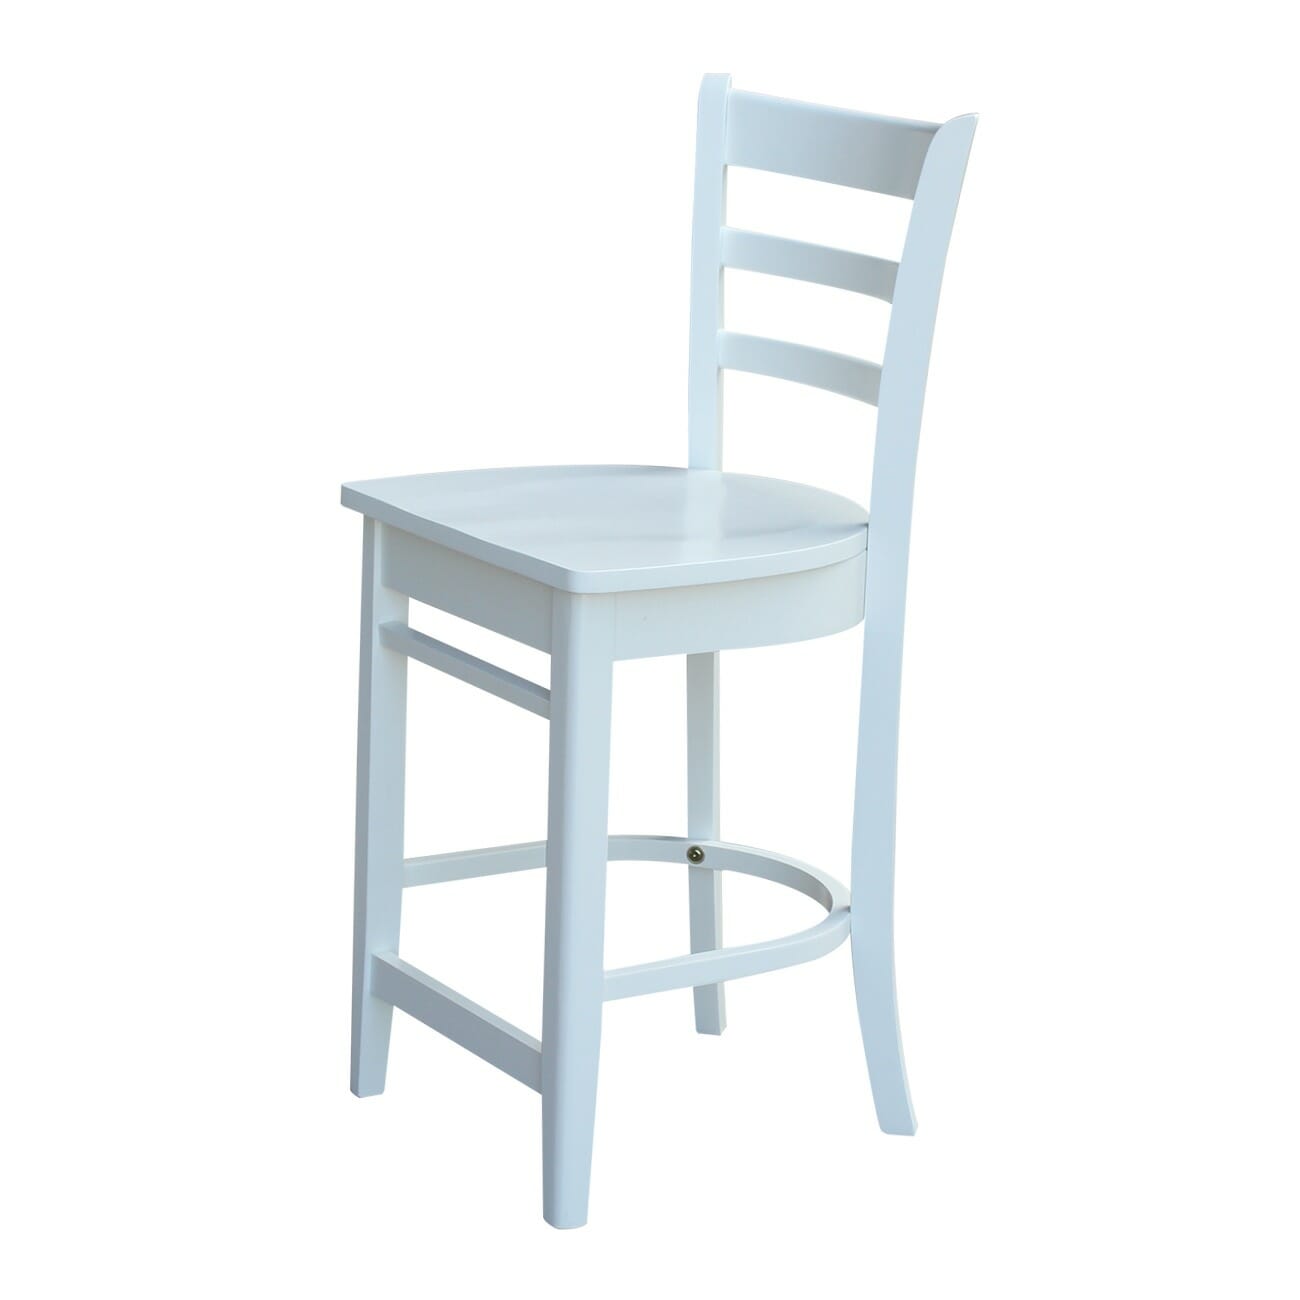 S-6172 Emily Counterstool 5